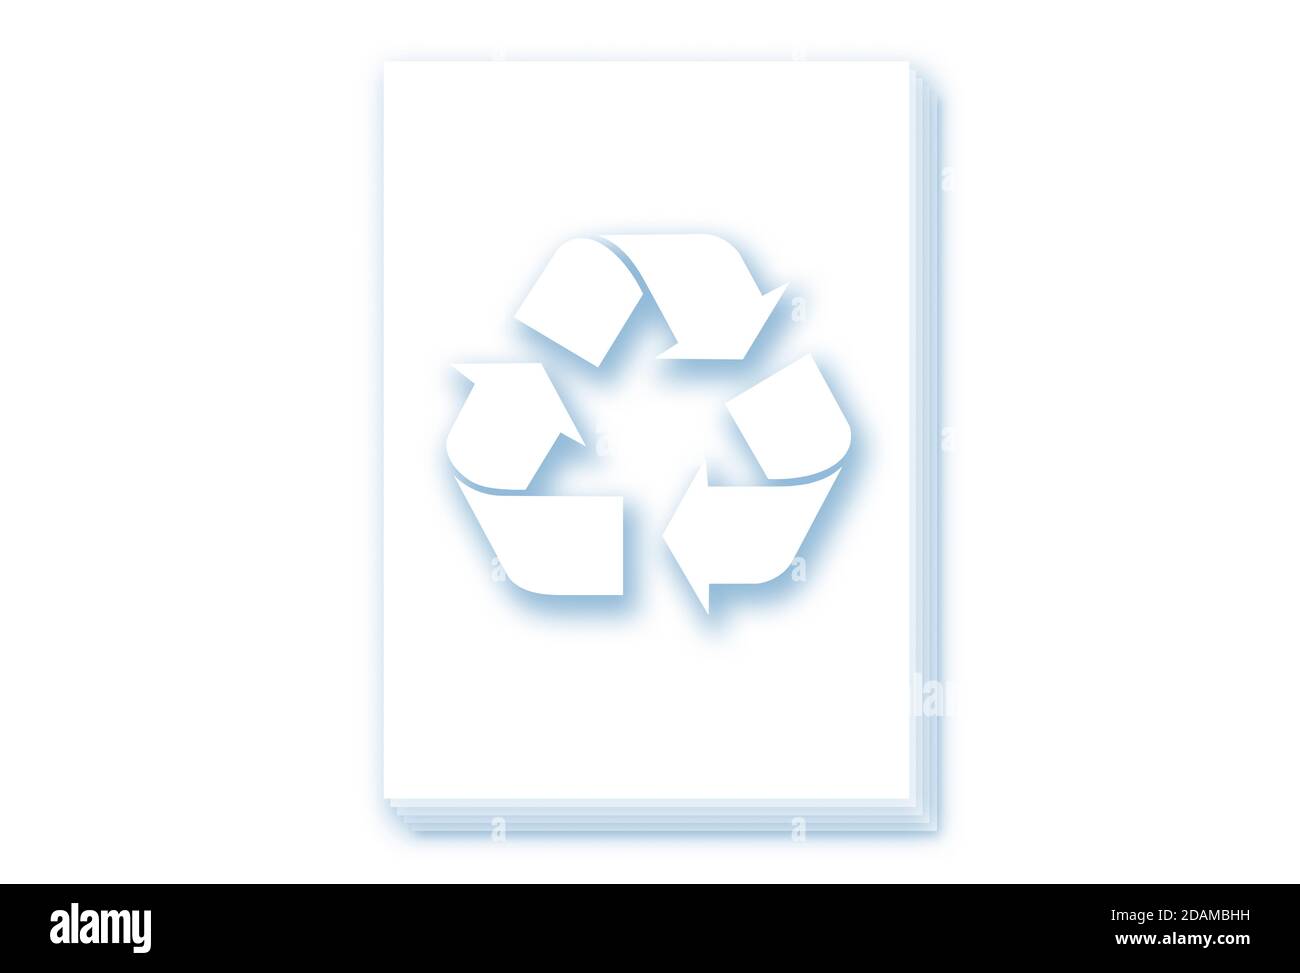 Sheets of paper with recycling symbol, illustration. Stock Photo